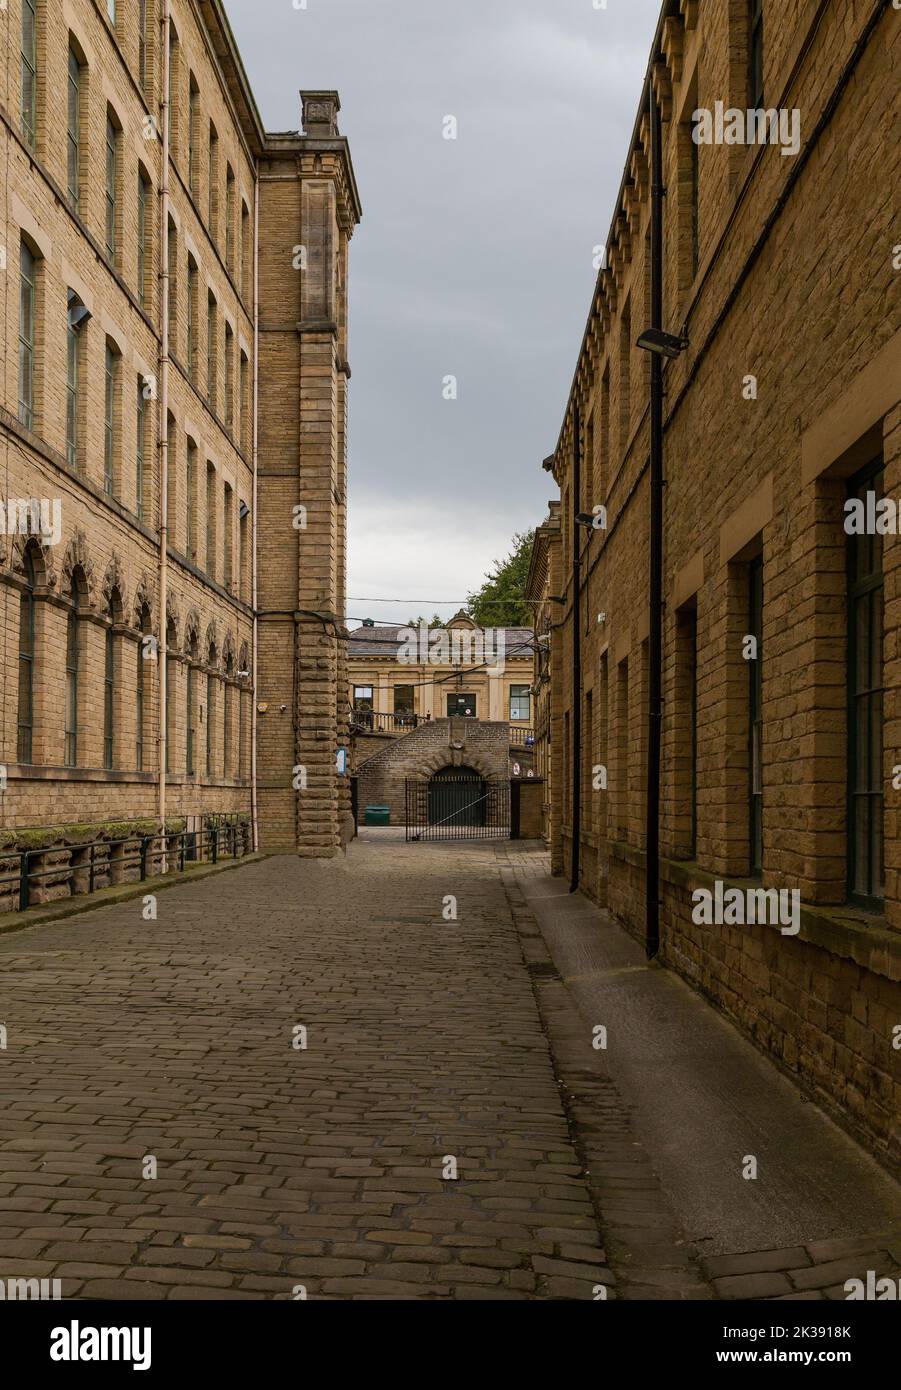 The magnificent Salts Mill building in Saltaire, Yorkshire. Salts Mill is a former textile mill, now home to an art gallery with small businesses. Stock Photo